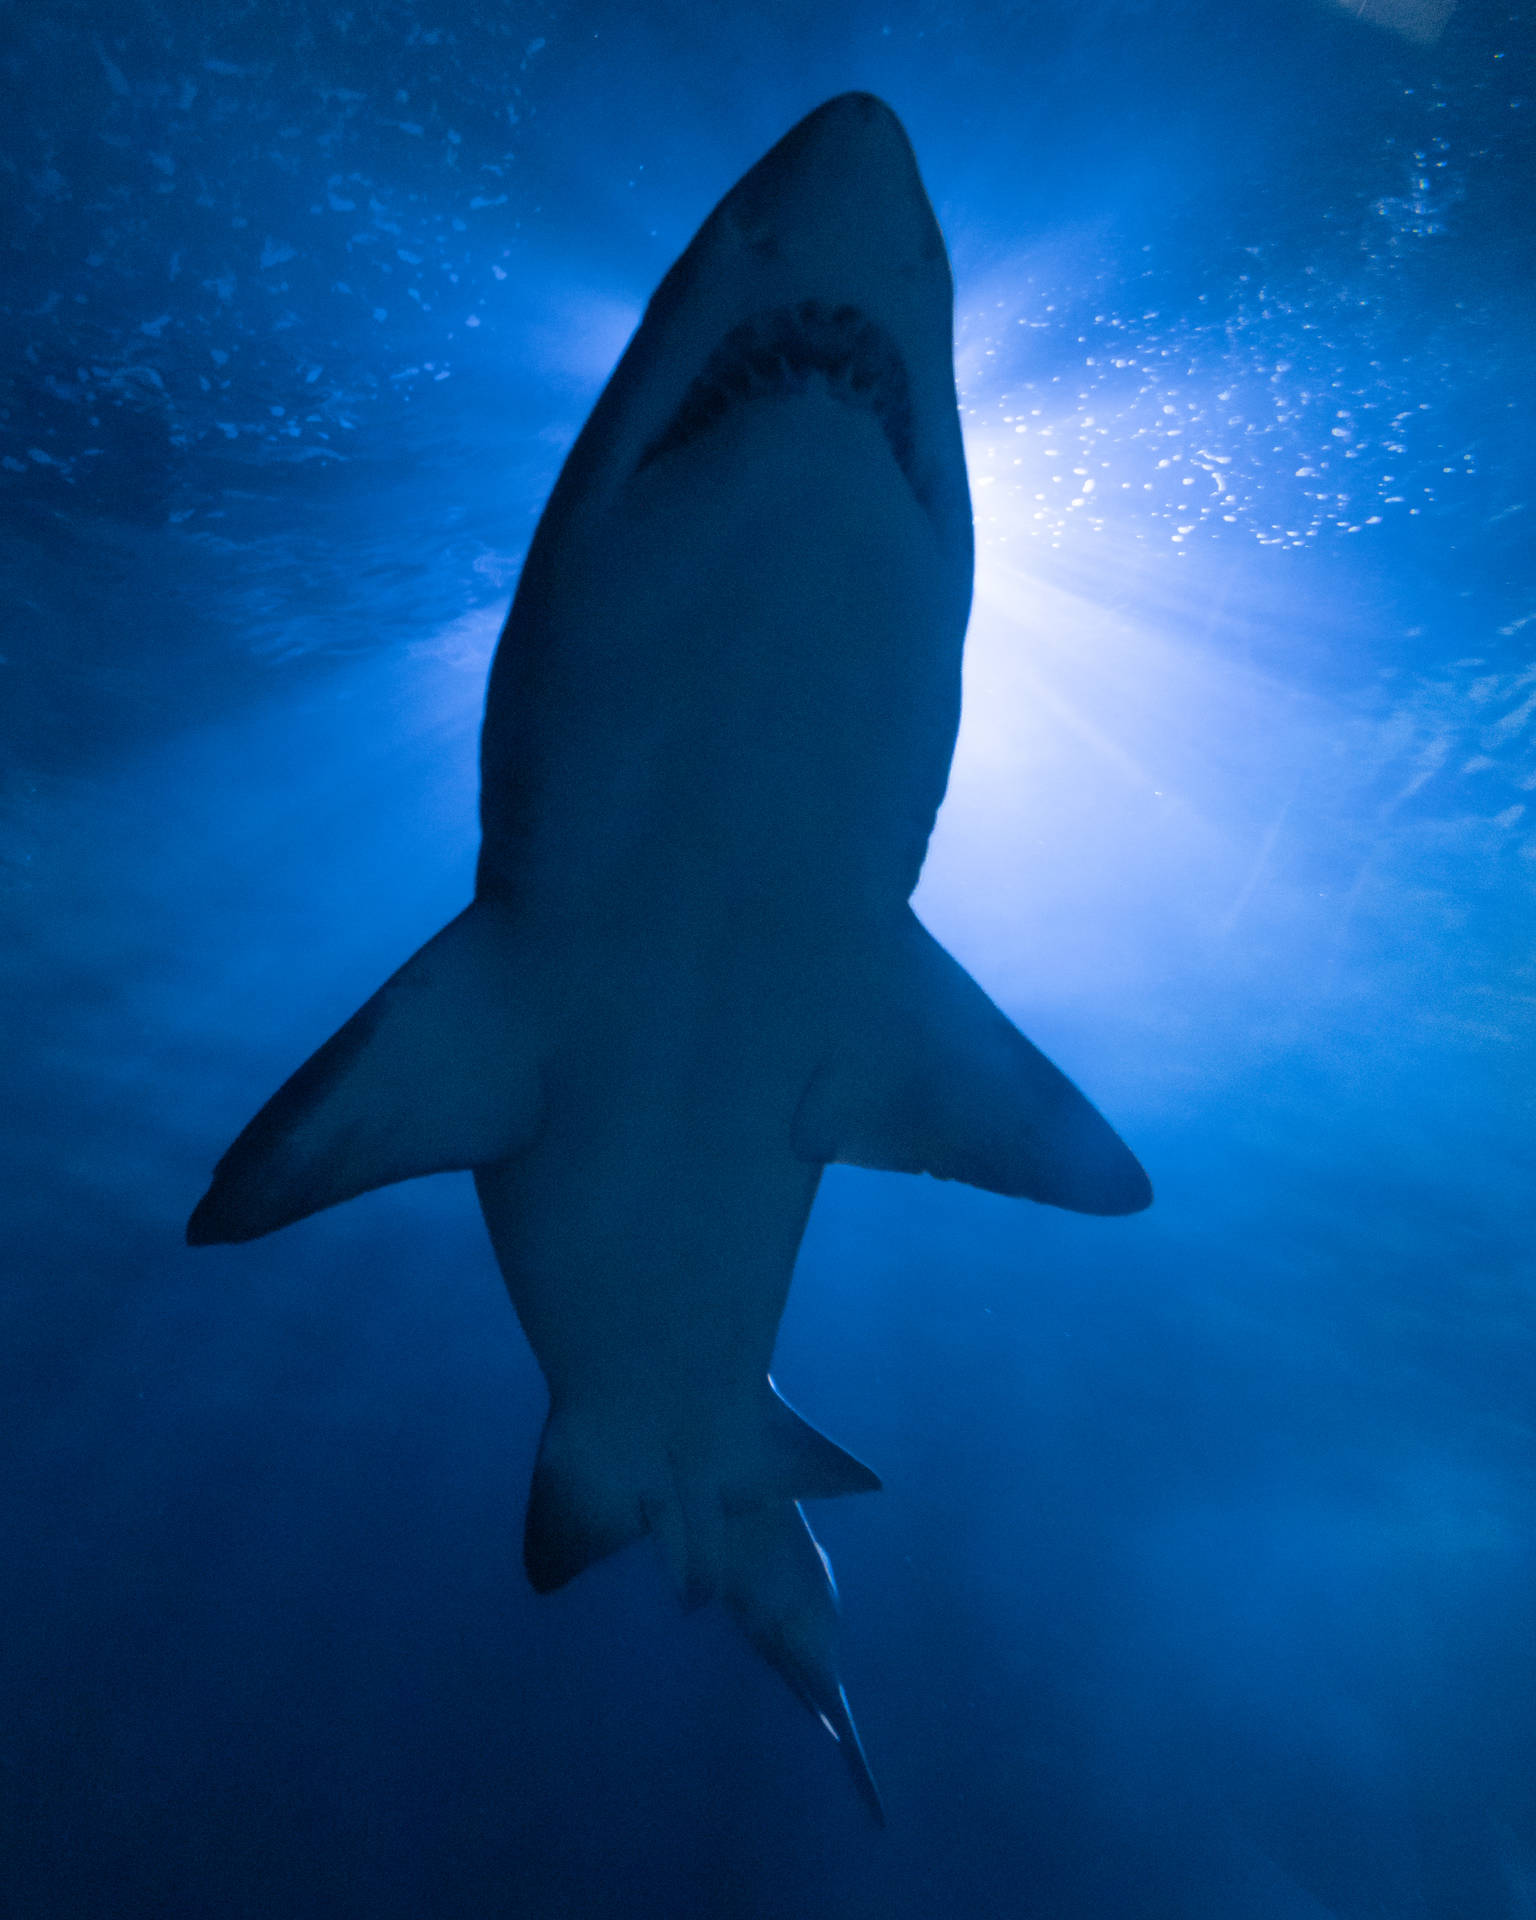 Shark 3907X4884 Wallpaper and Background Image